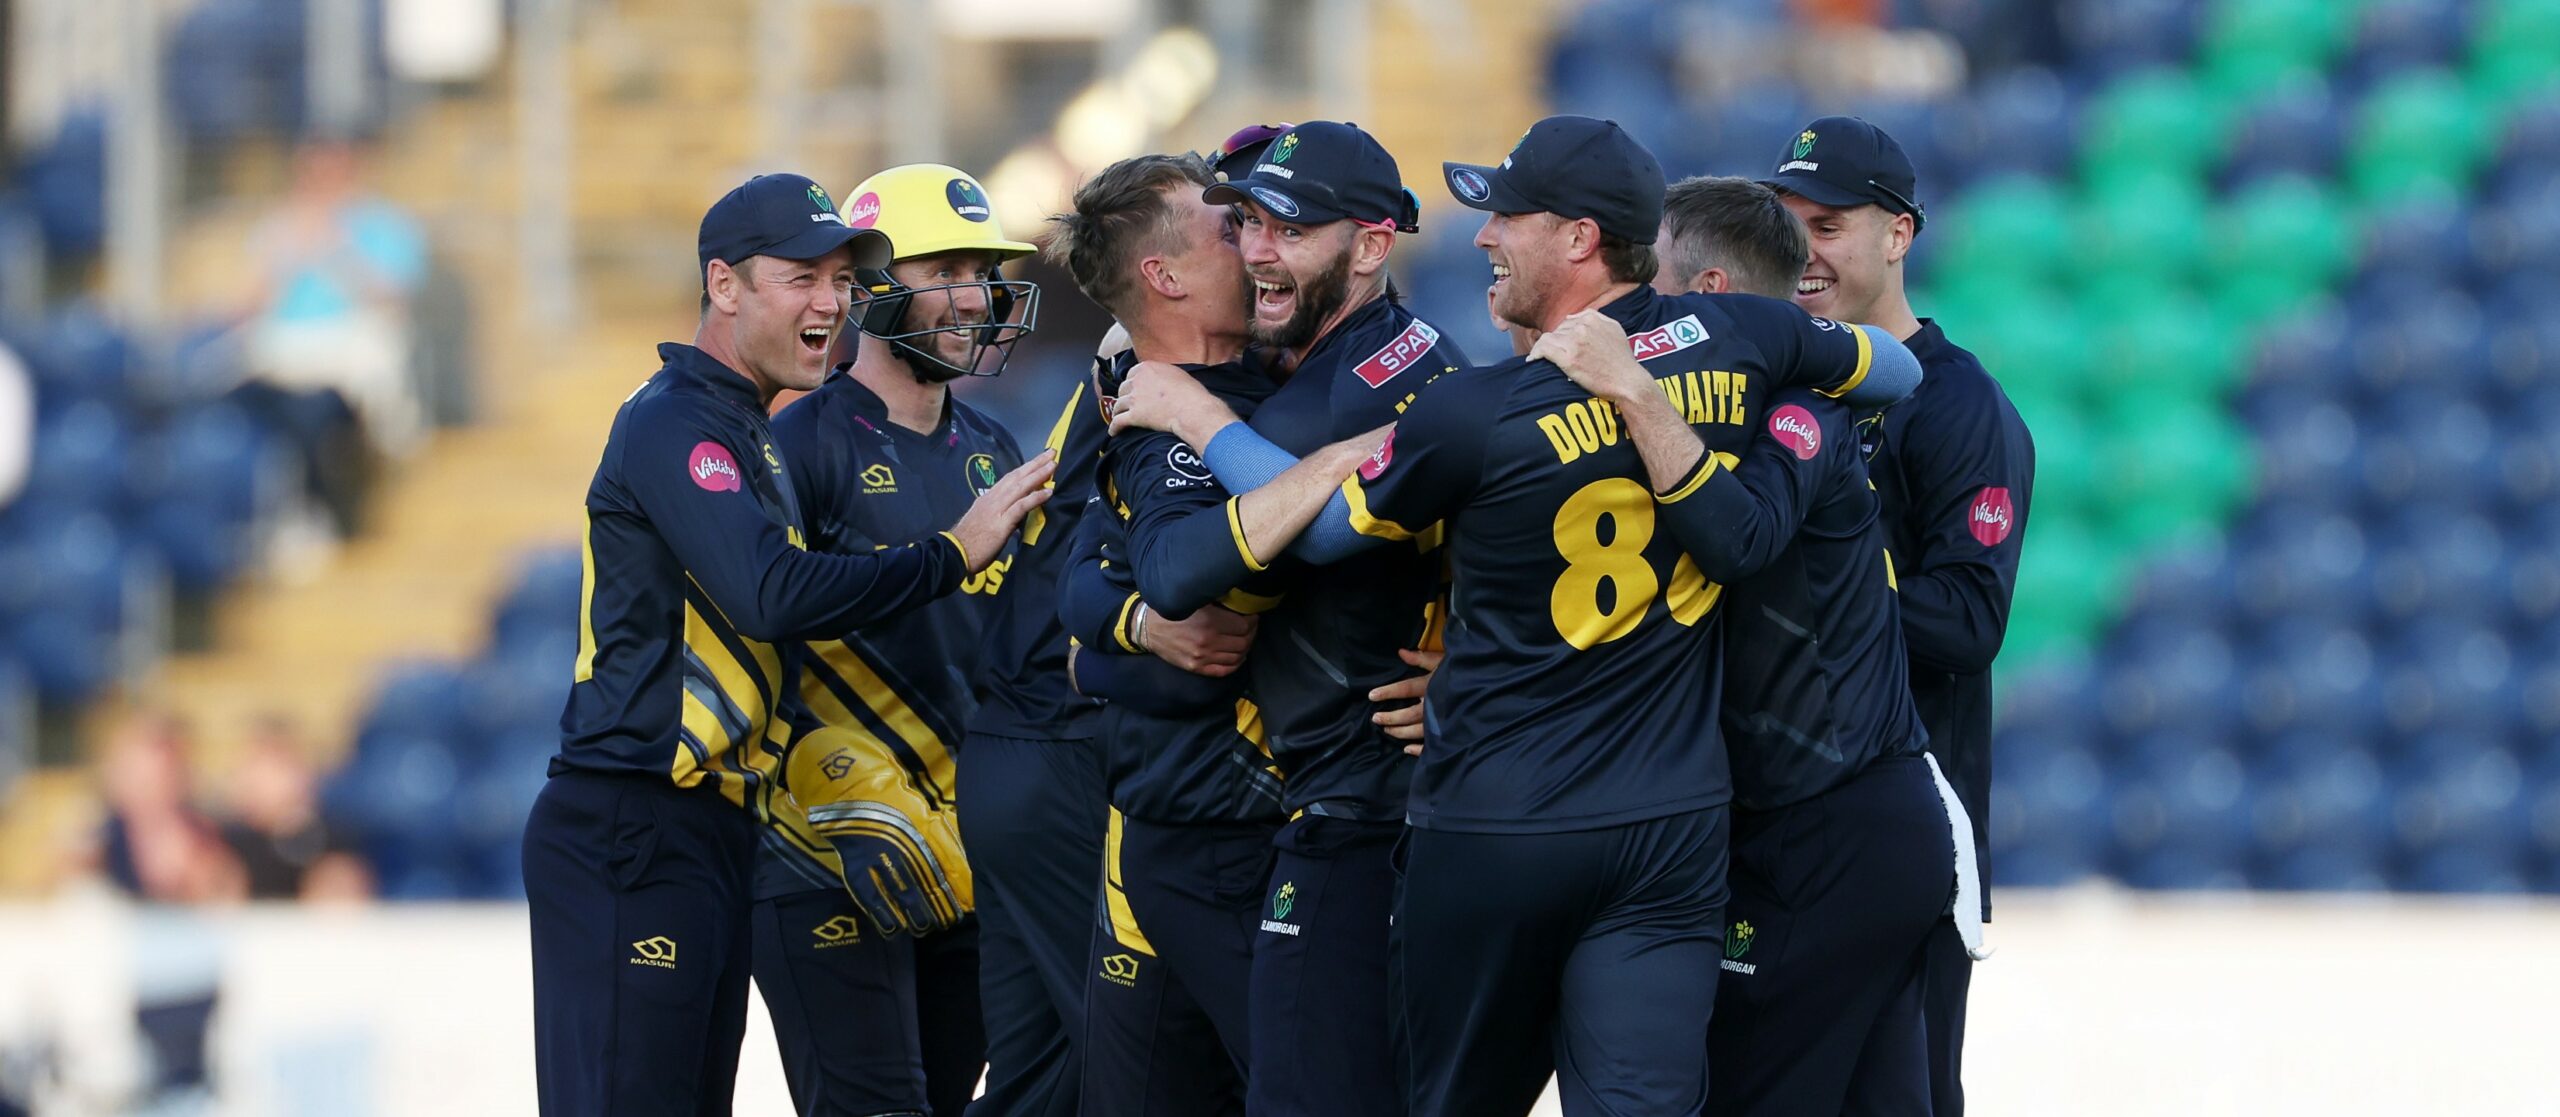 A cricket team celebrate and hug each other on the pitch